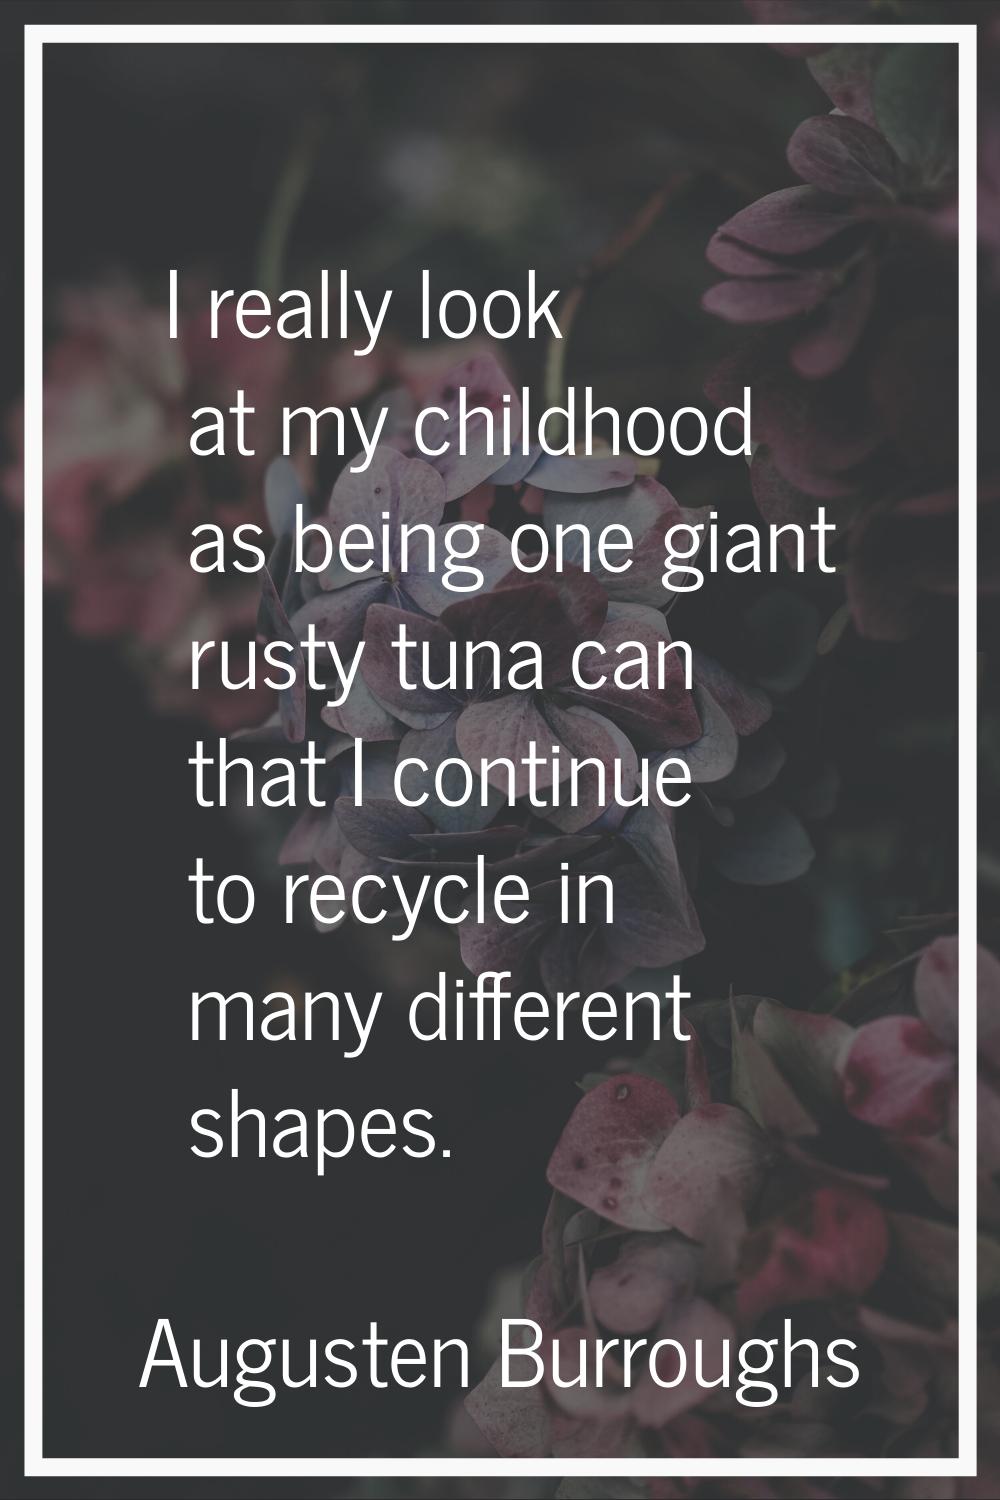 I really look at my childhood as being one giant rusty tuna can that I continue to recycle in many 